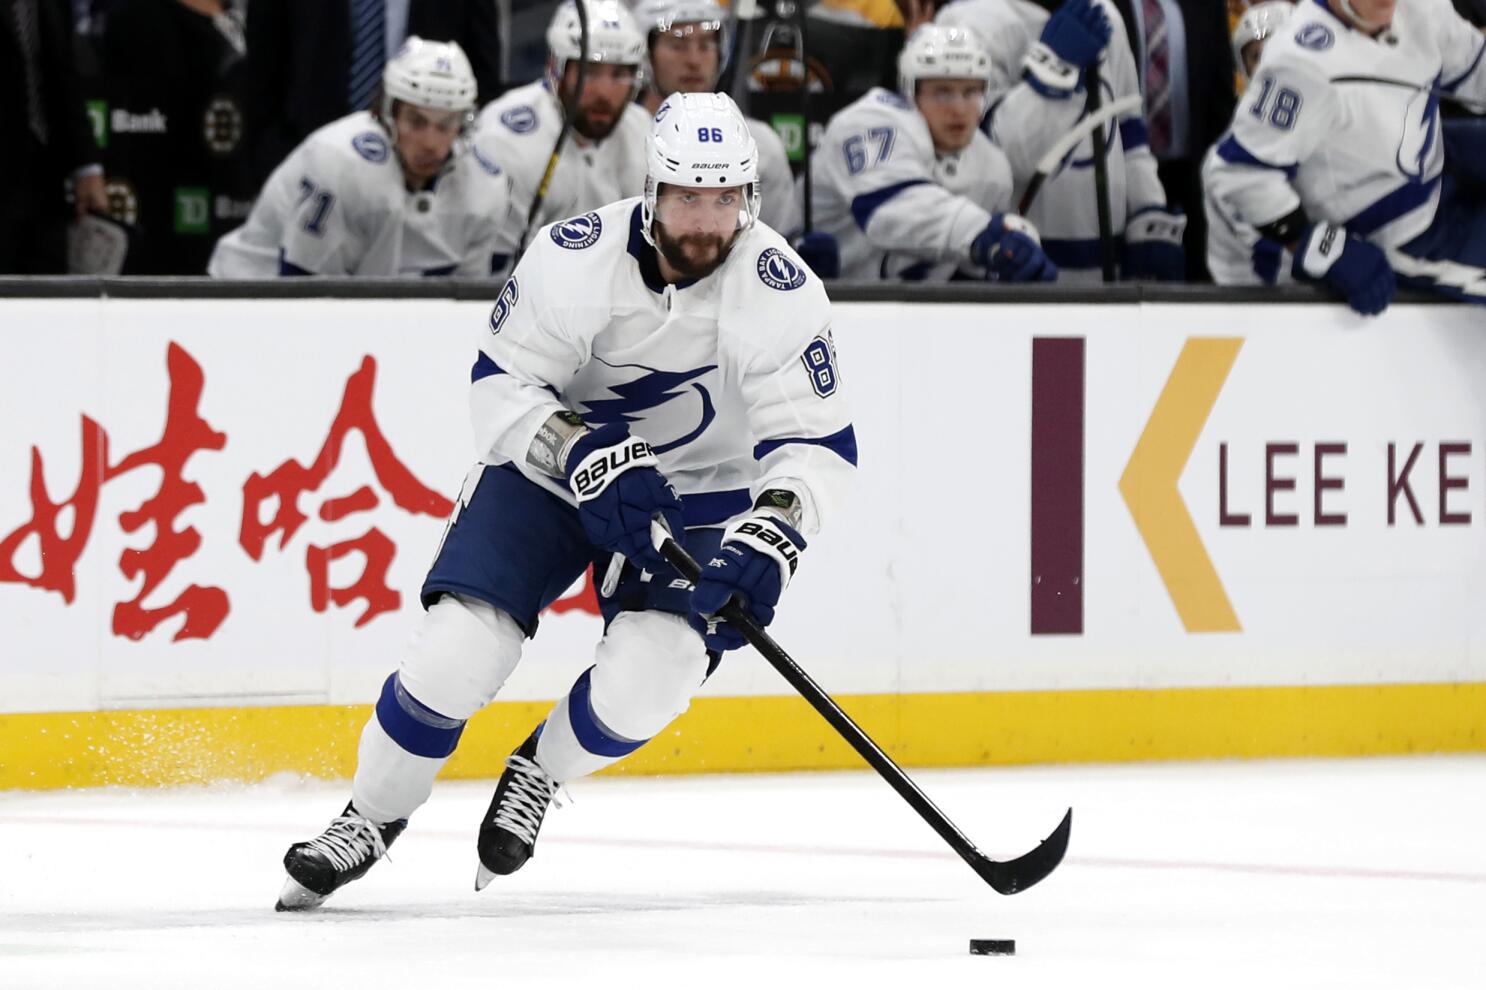 Tampa Bay's Stamkos in rare company as injured Cup captain